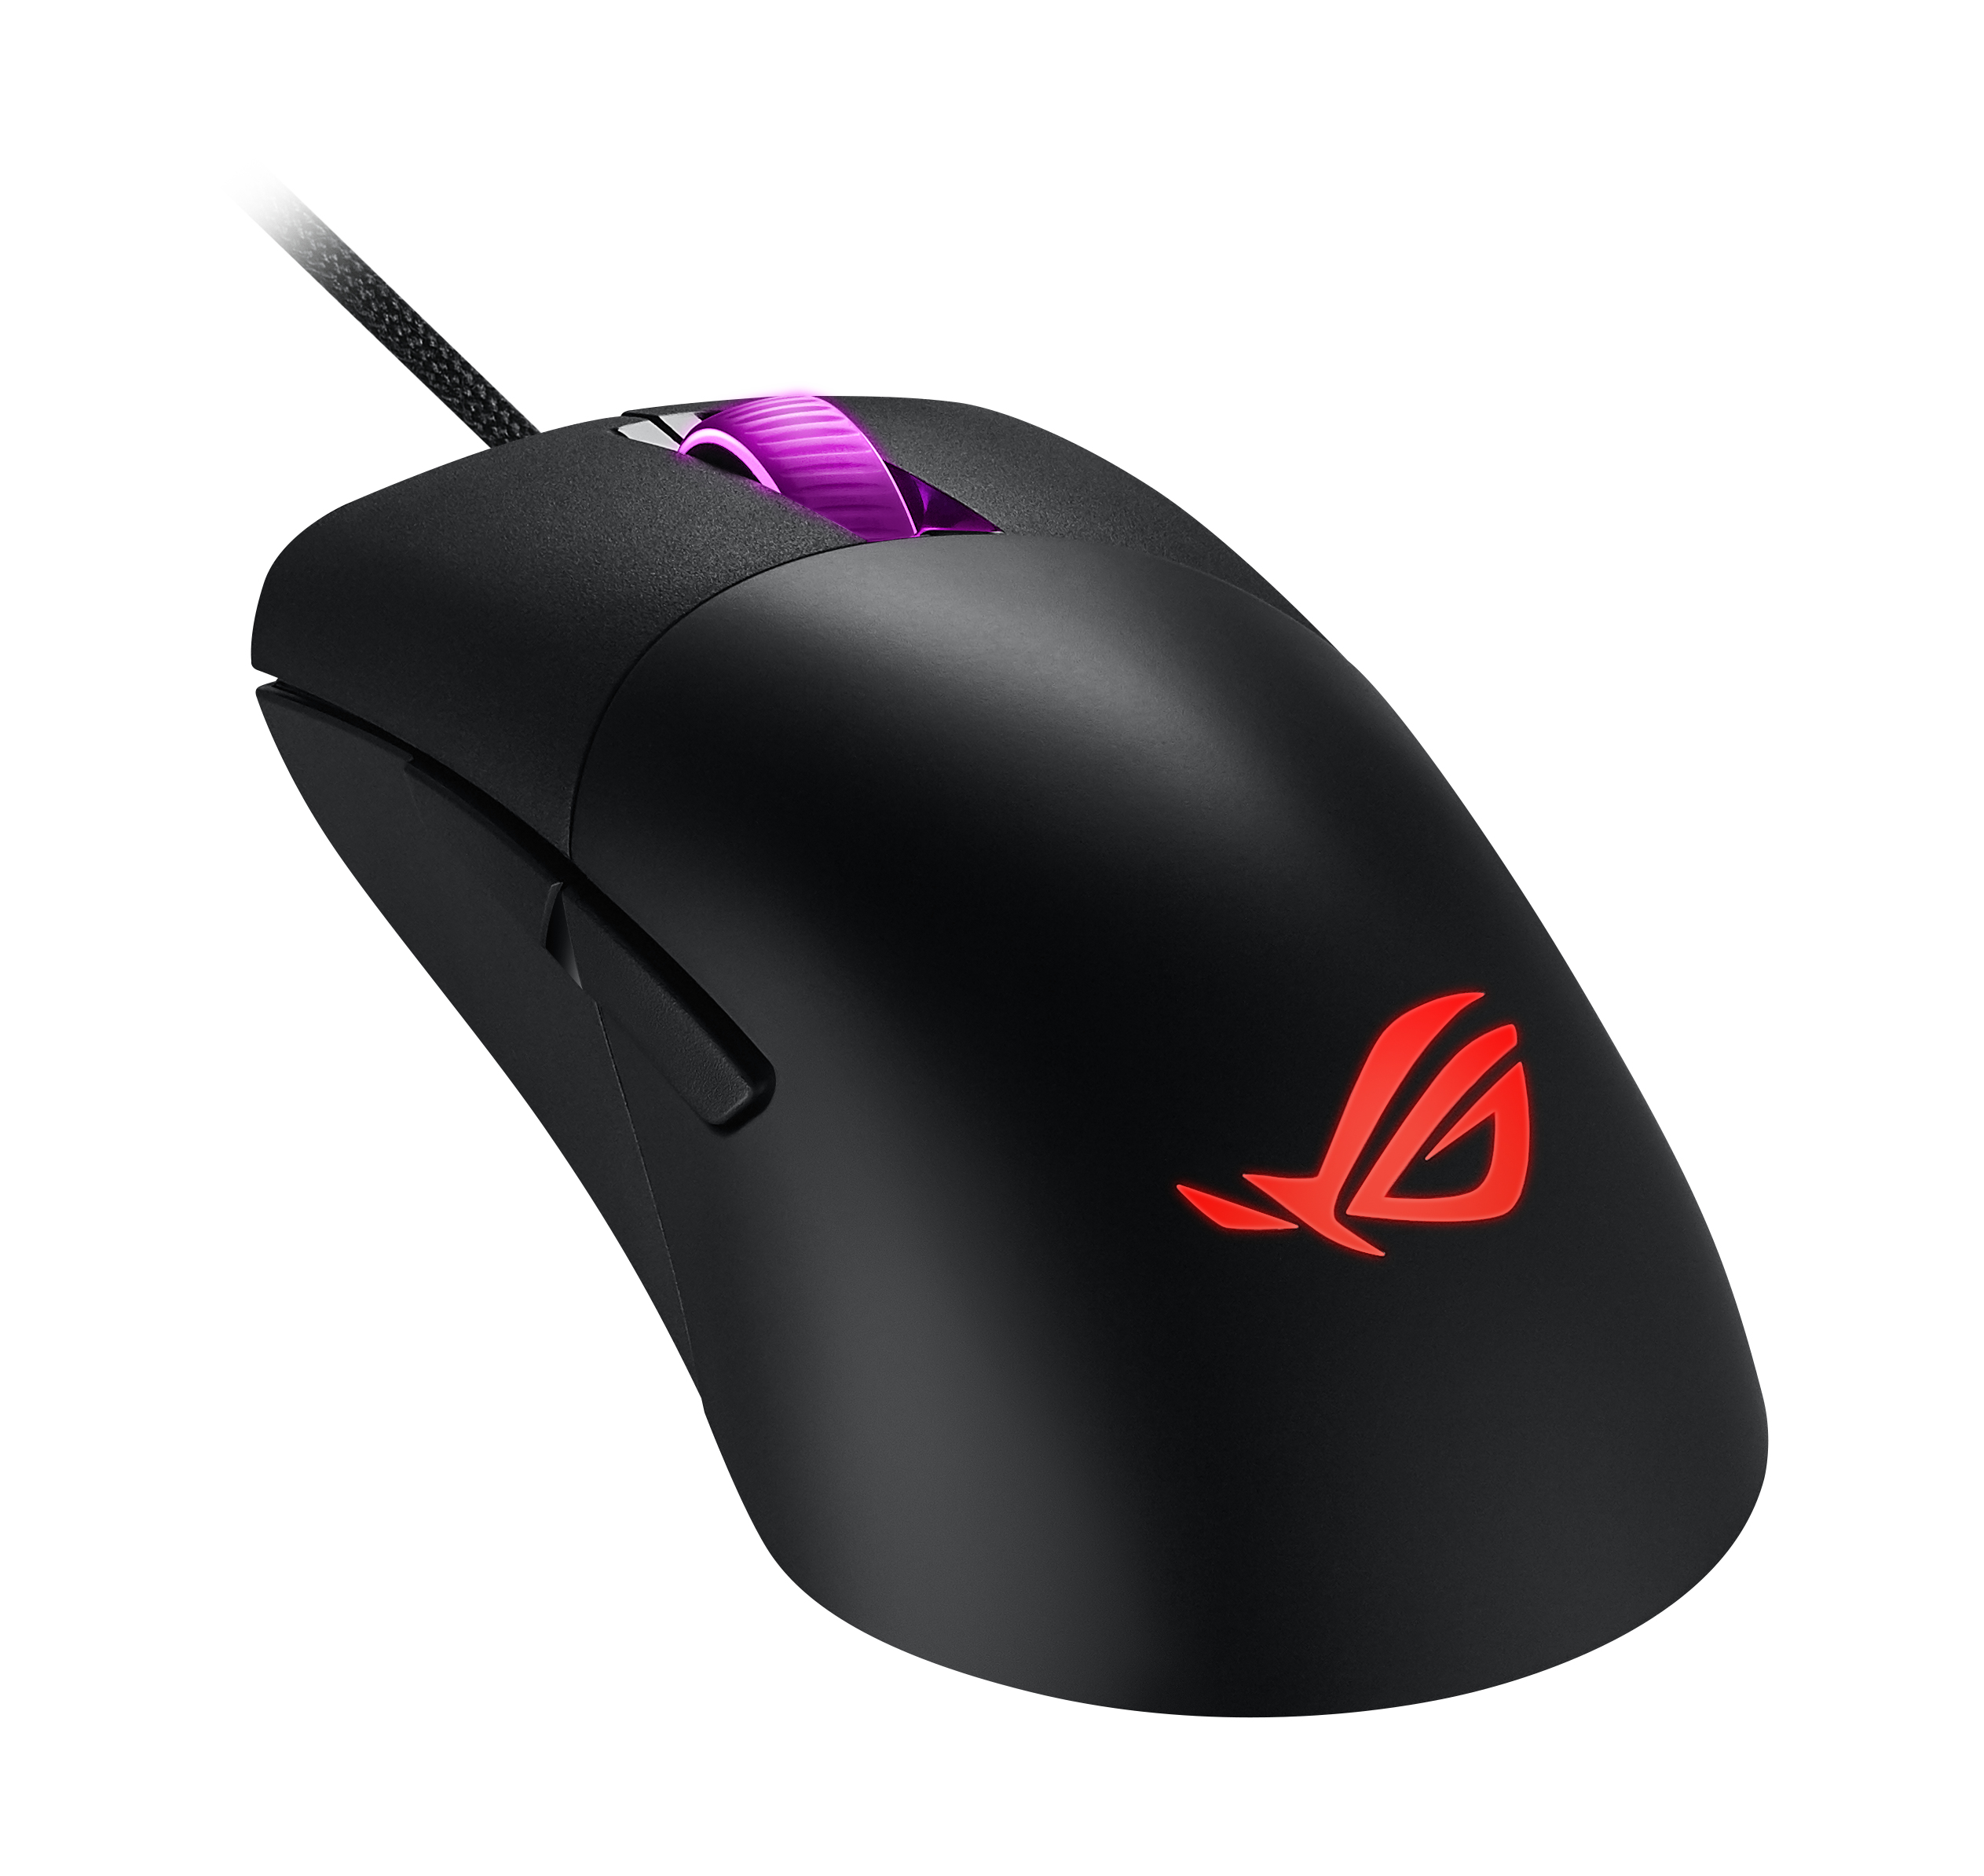 ASUS ROG KERIS MOUSE  RIGHT HANDED  OPTICAL  WIRED  USB  BLACK